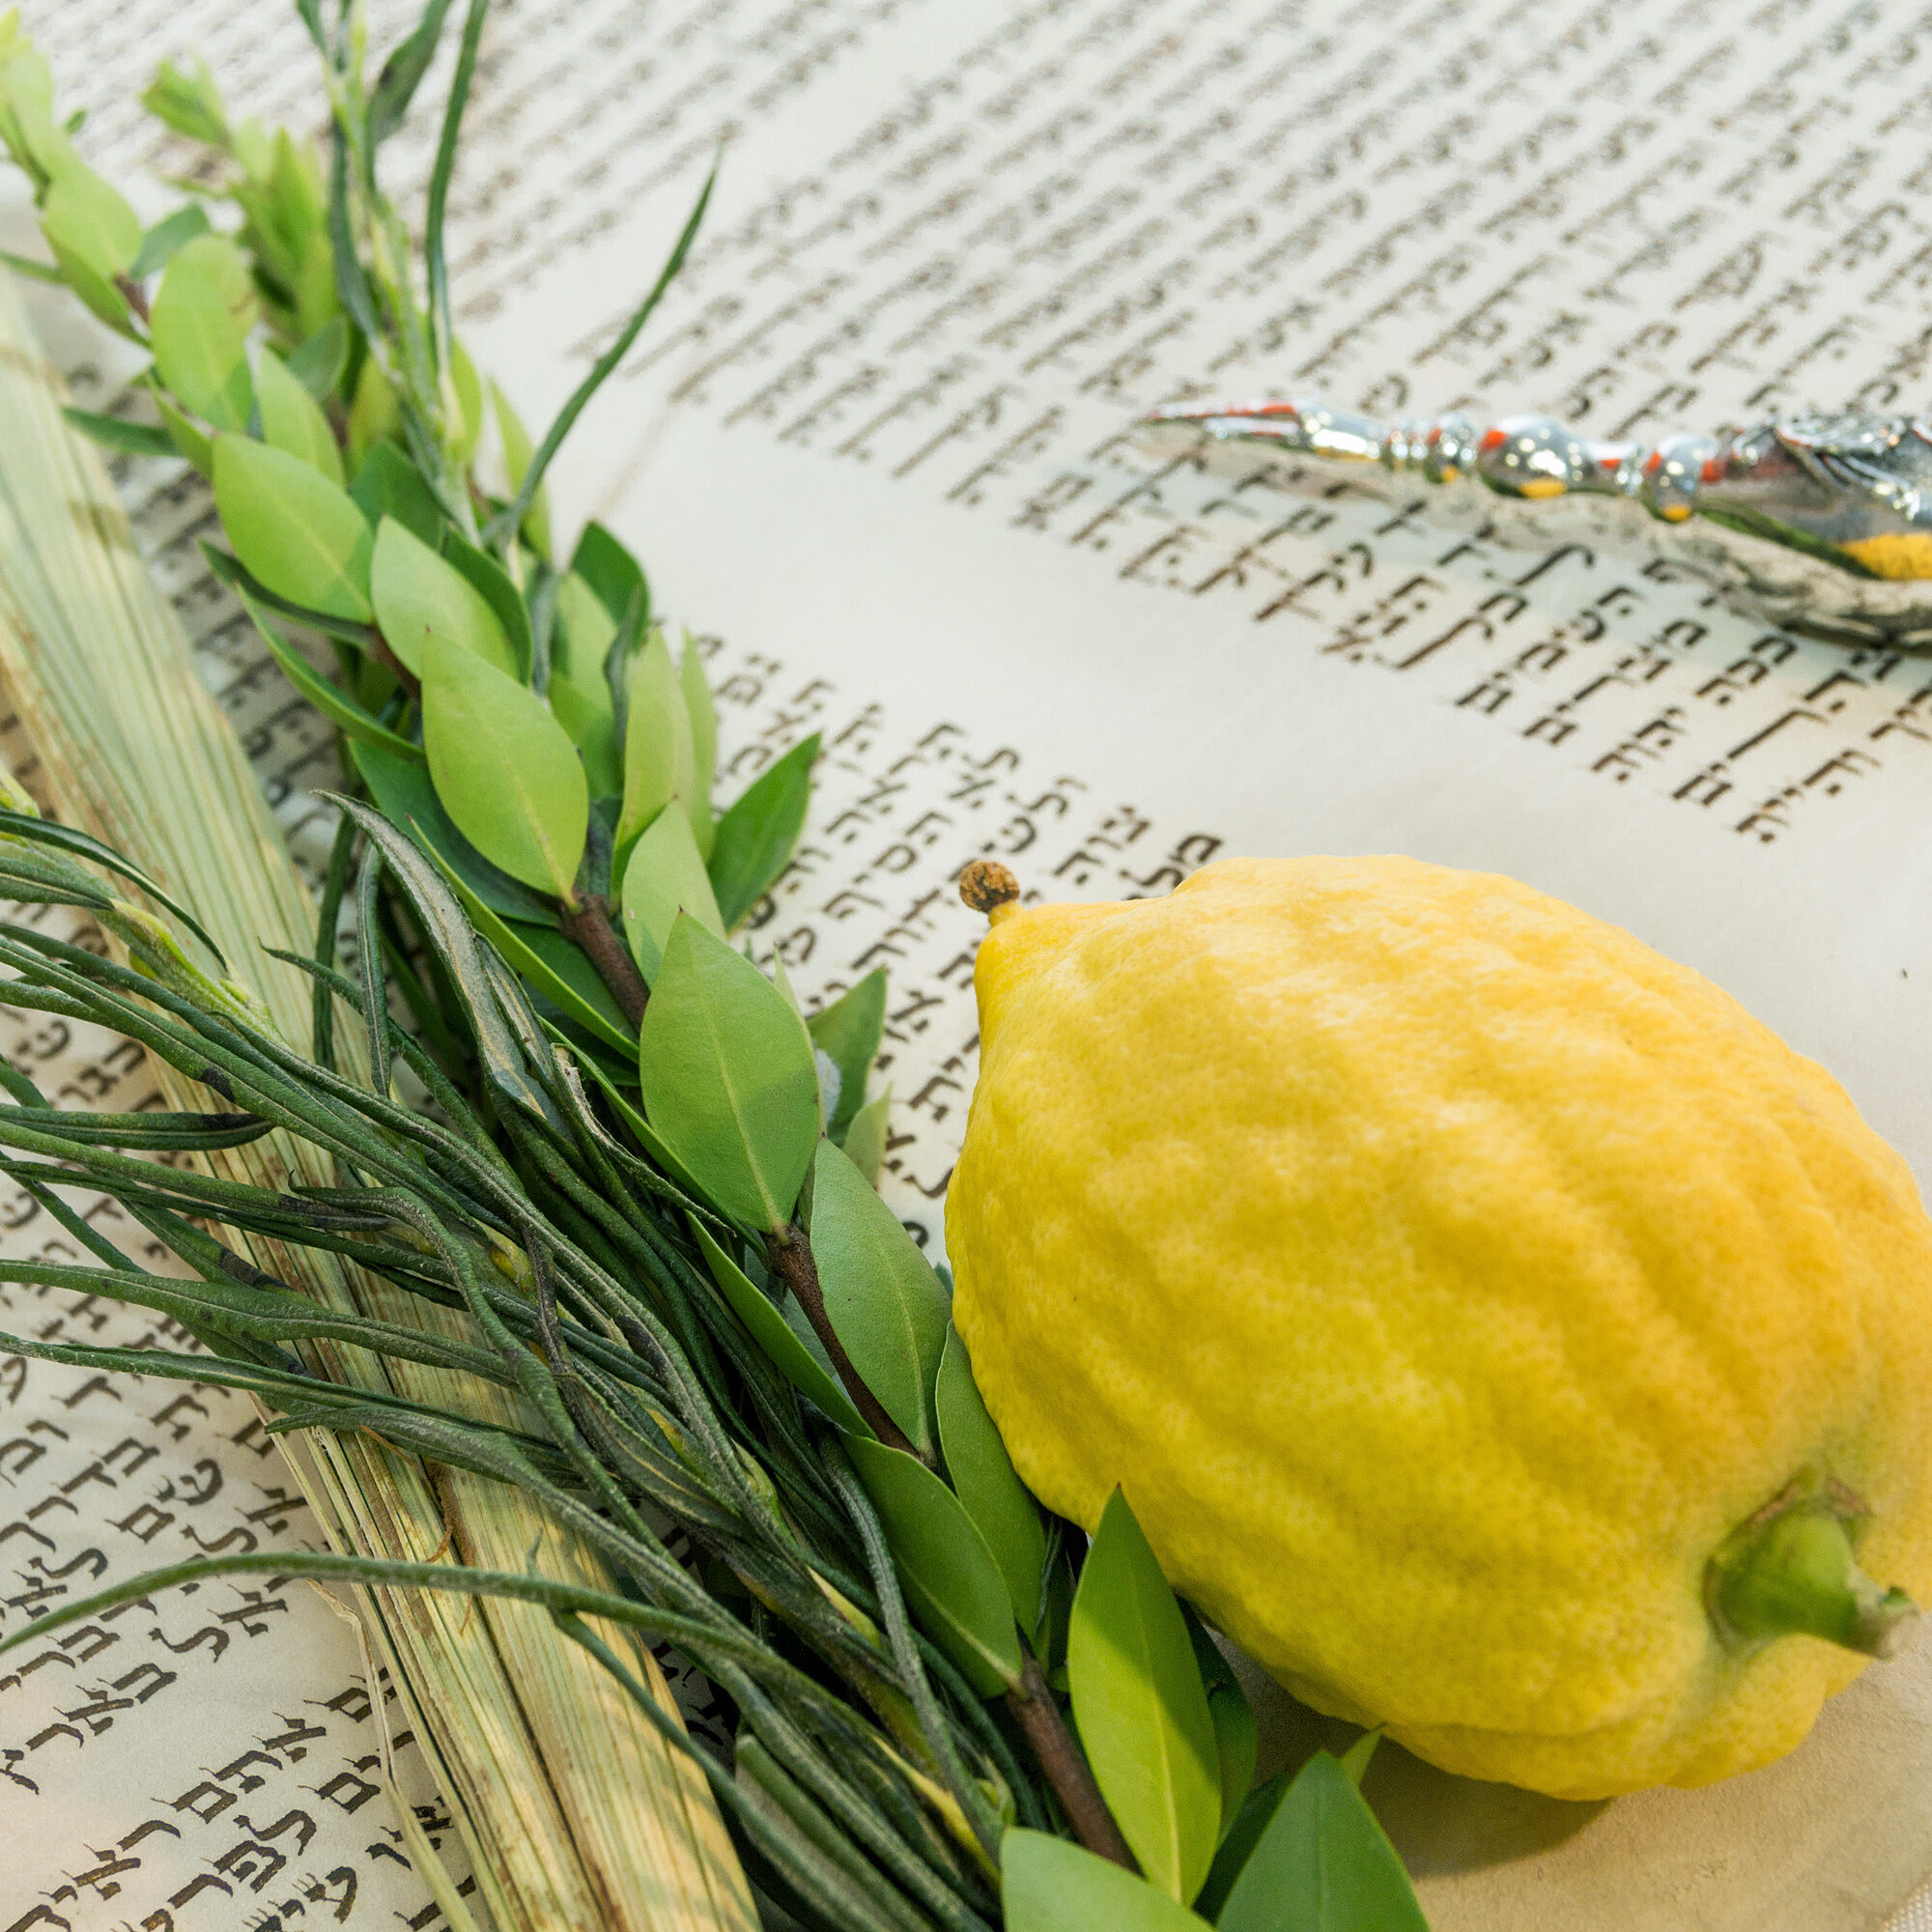 Torah parchment, the Hebrew, the Jewish holiday of Sukkot, the lulav, a special bouquet